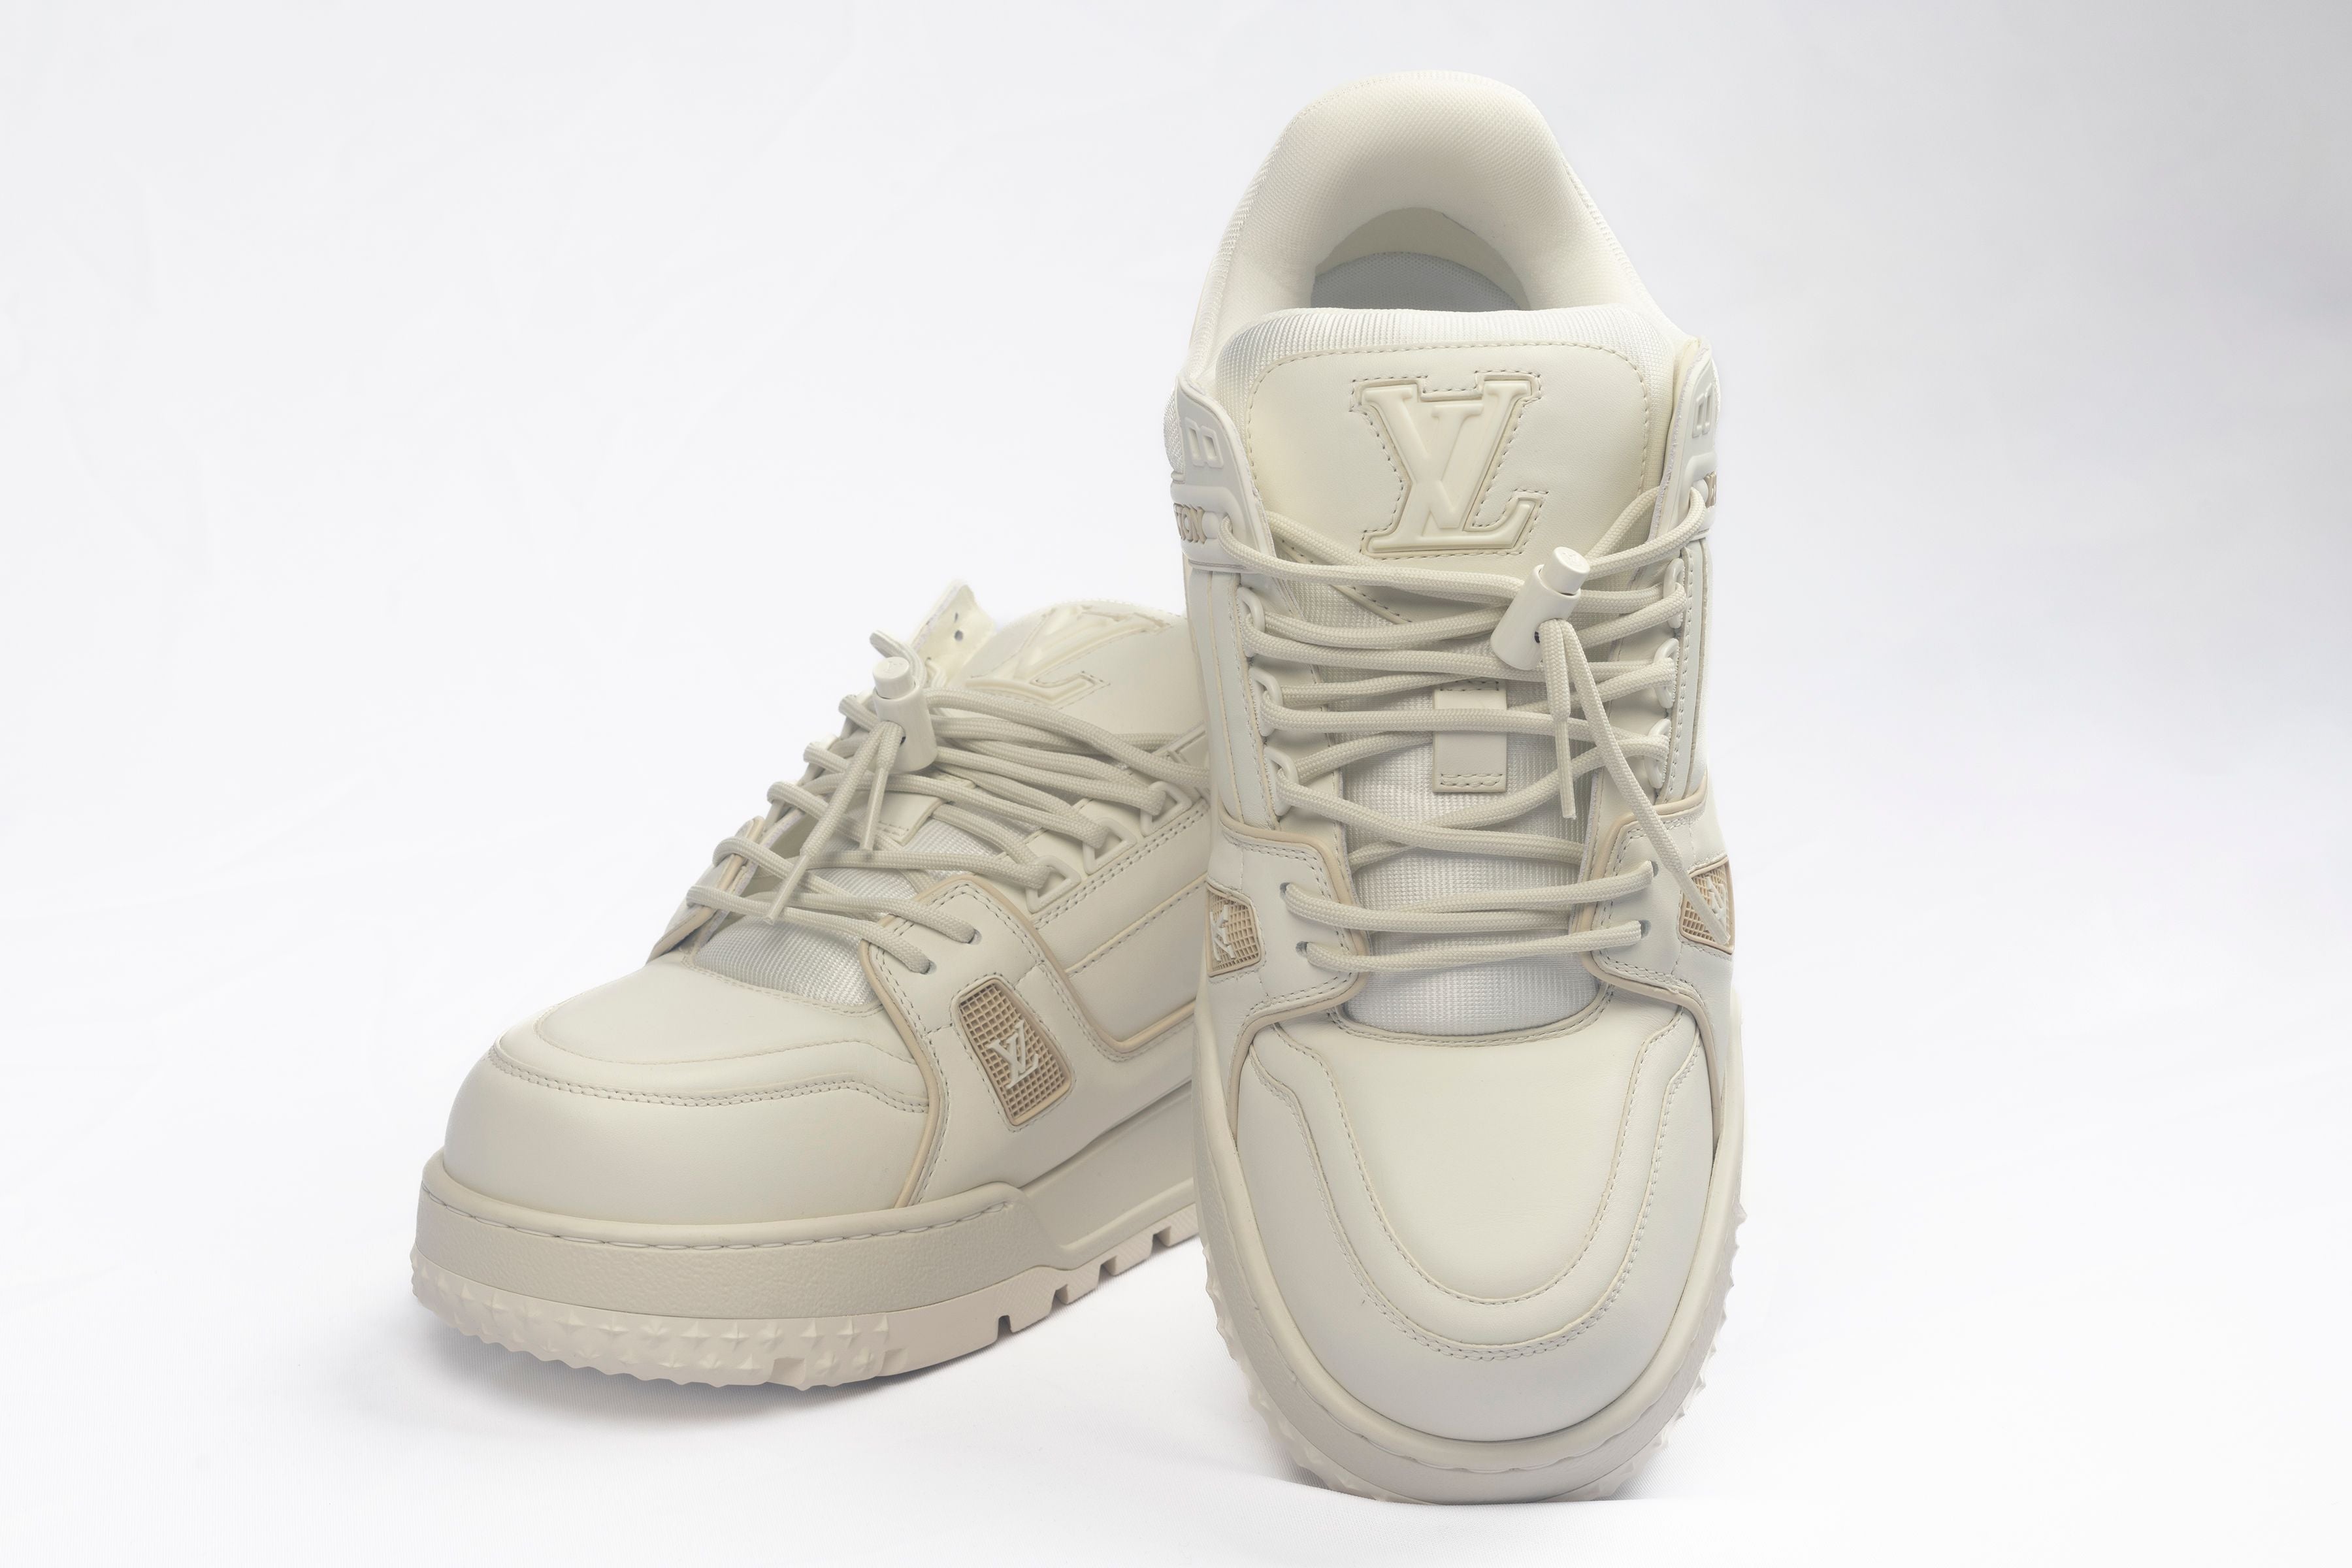 Louis Vuitton Trainer Maxi Sneaker showing off the tongue and LV logo